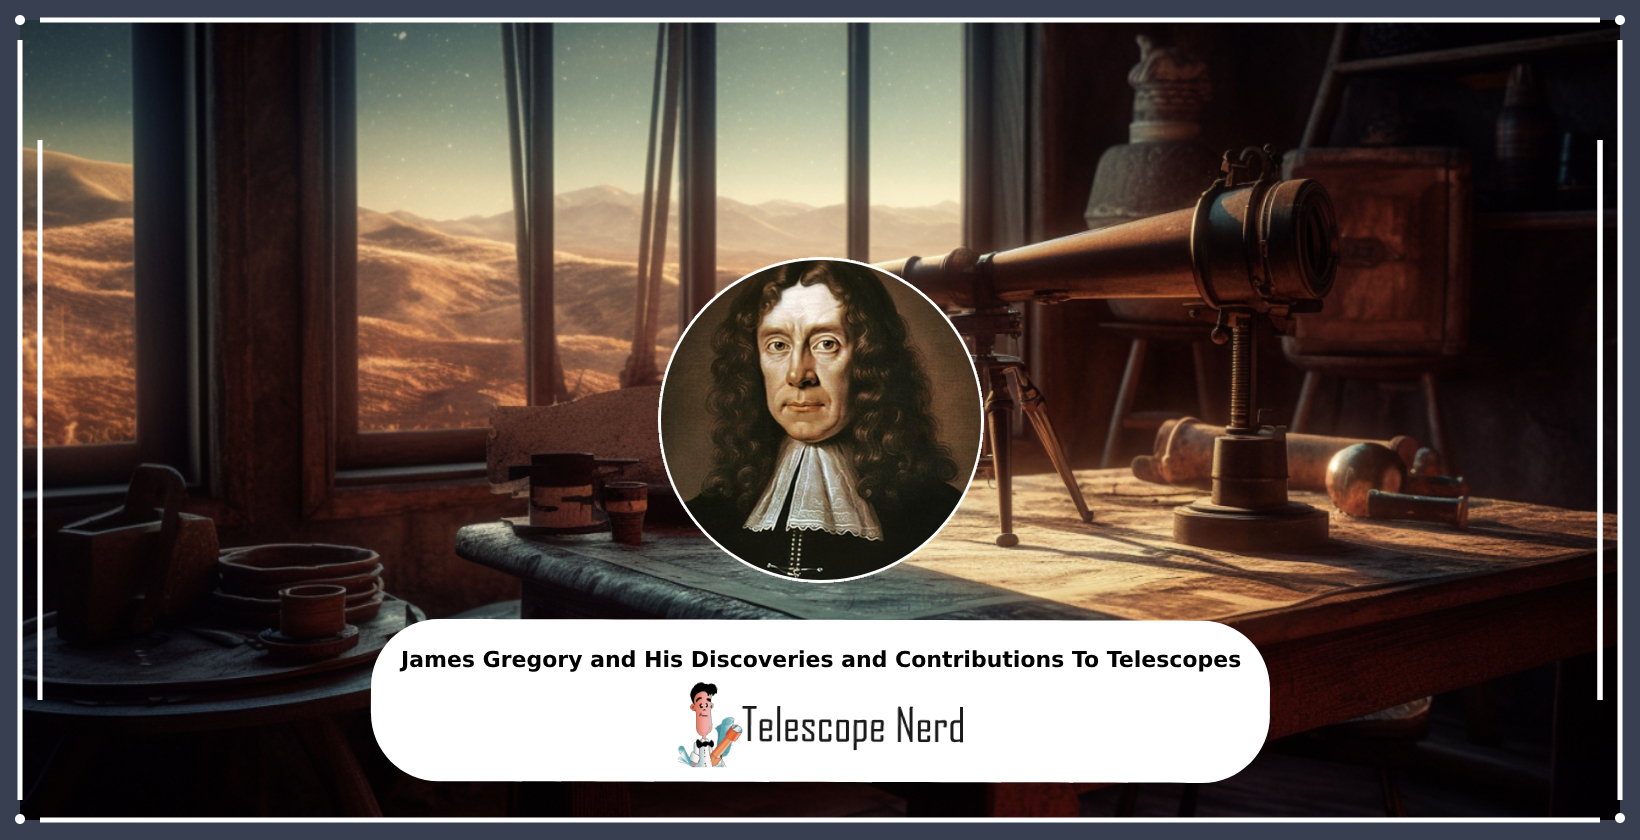 james gregory mathematician and his contributions to telescopes